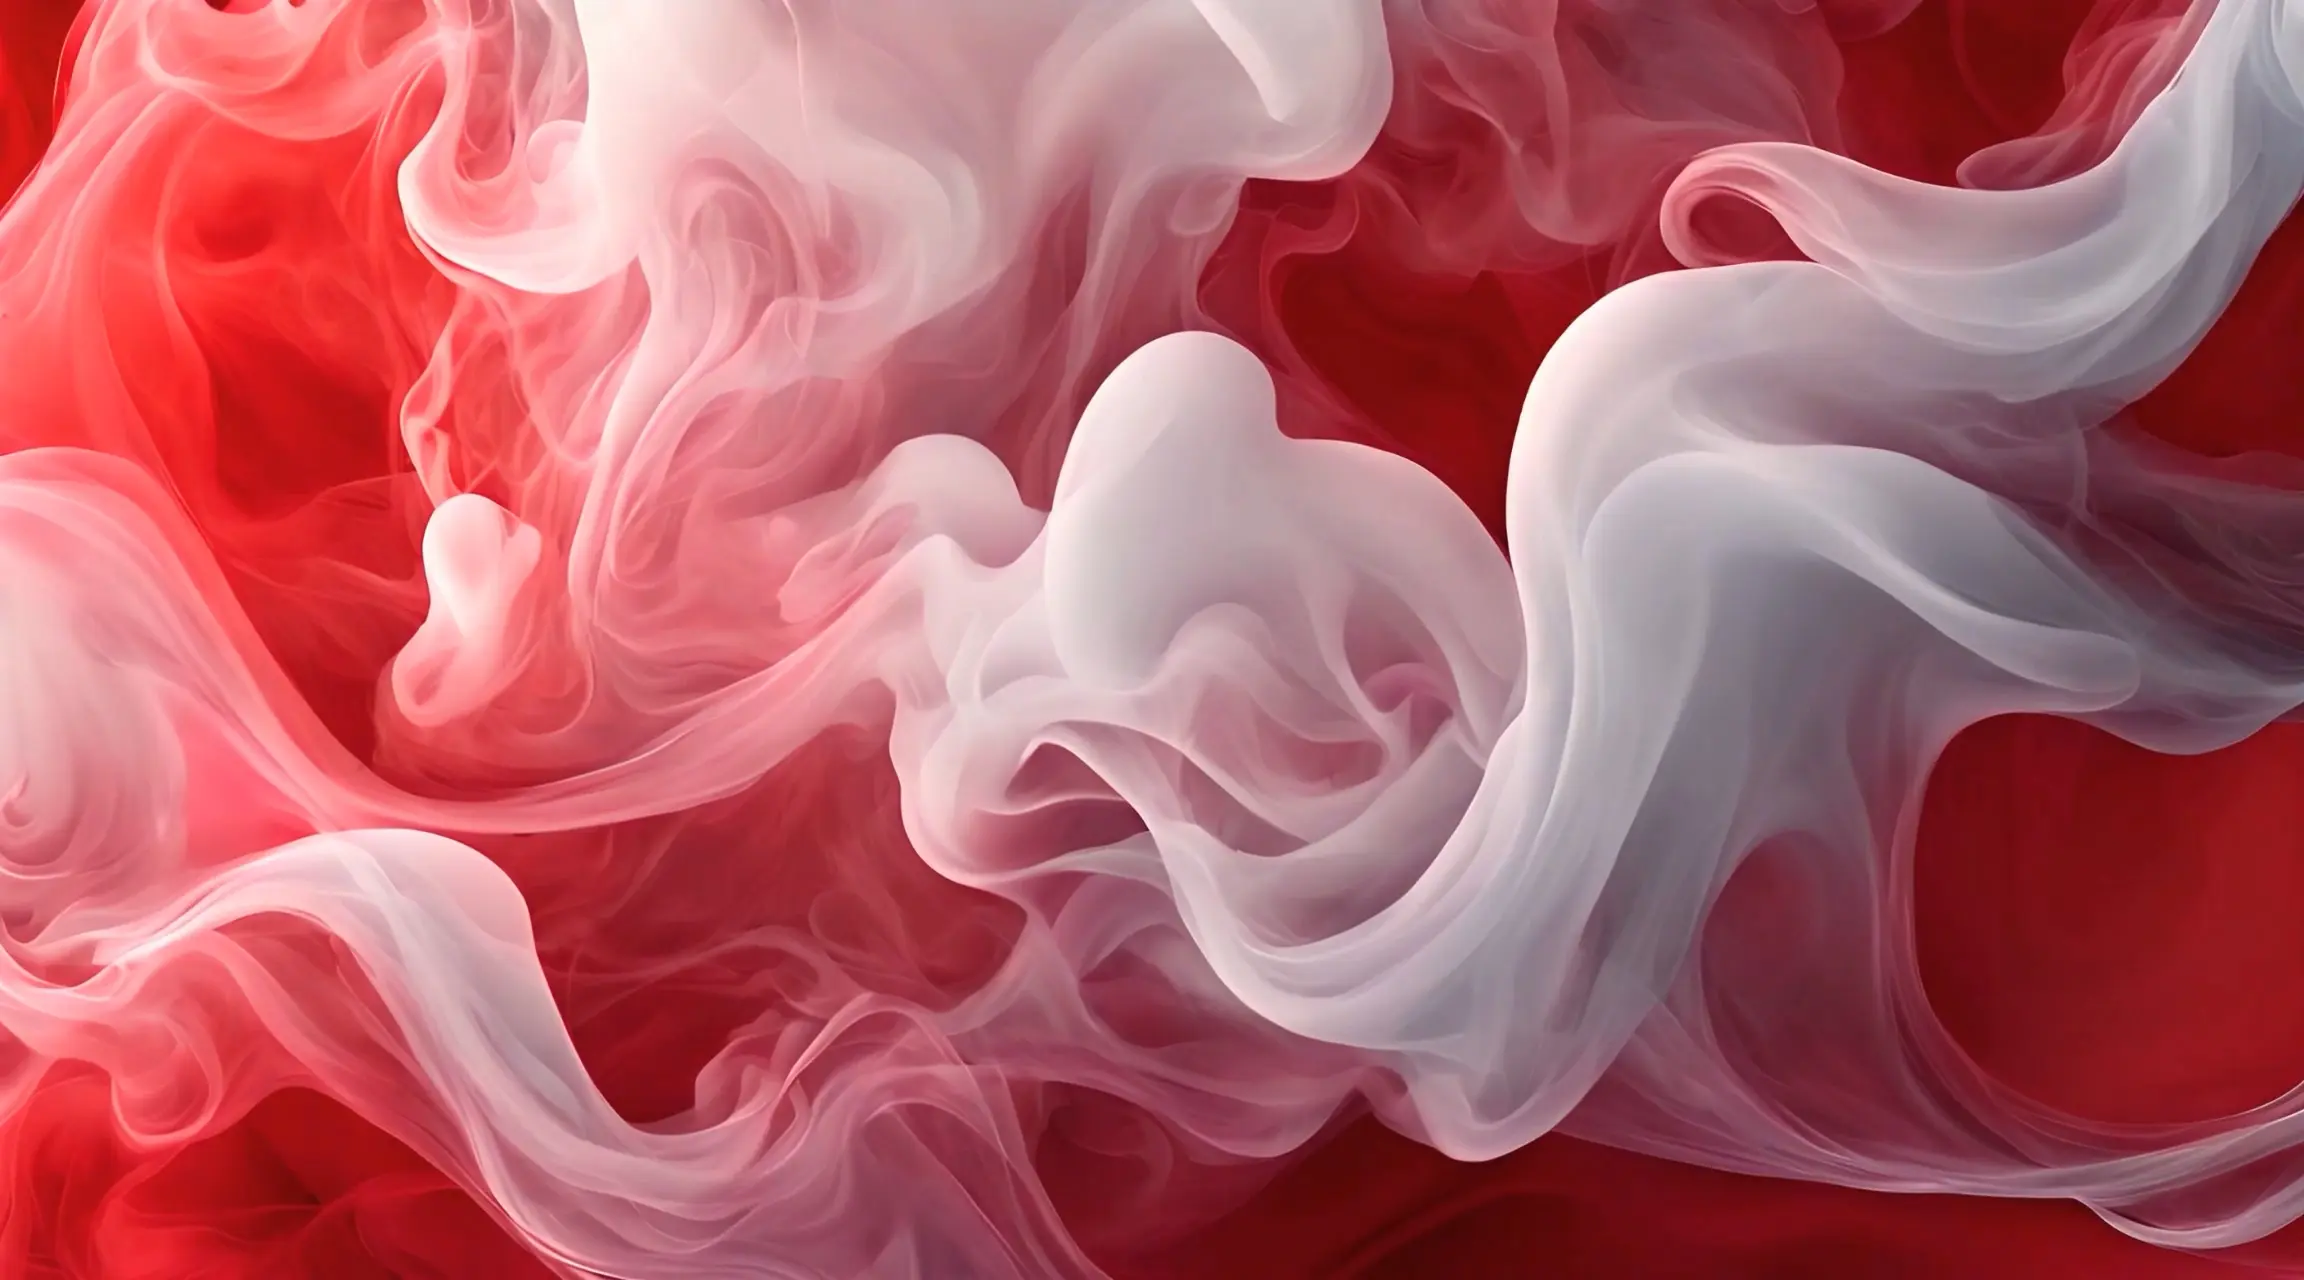 Abstract Smoke Dance Red and White Video Backdrop